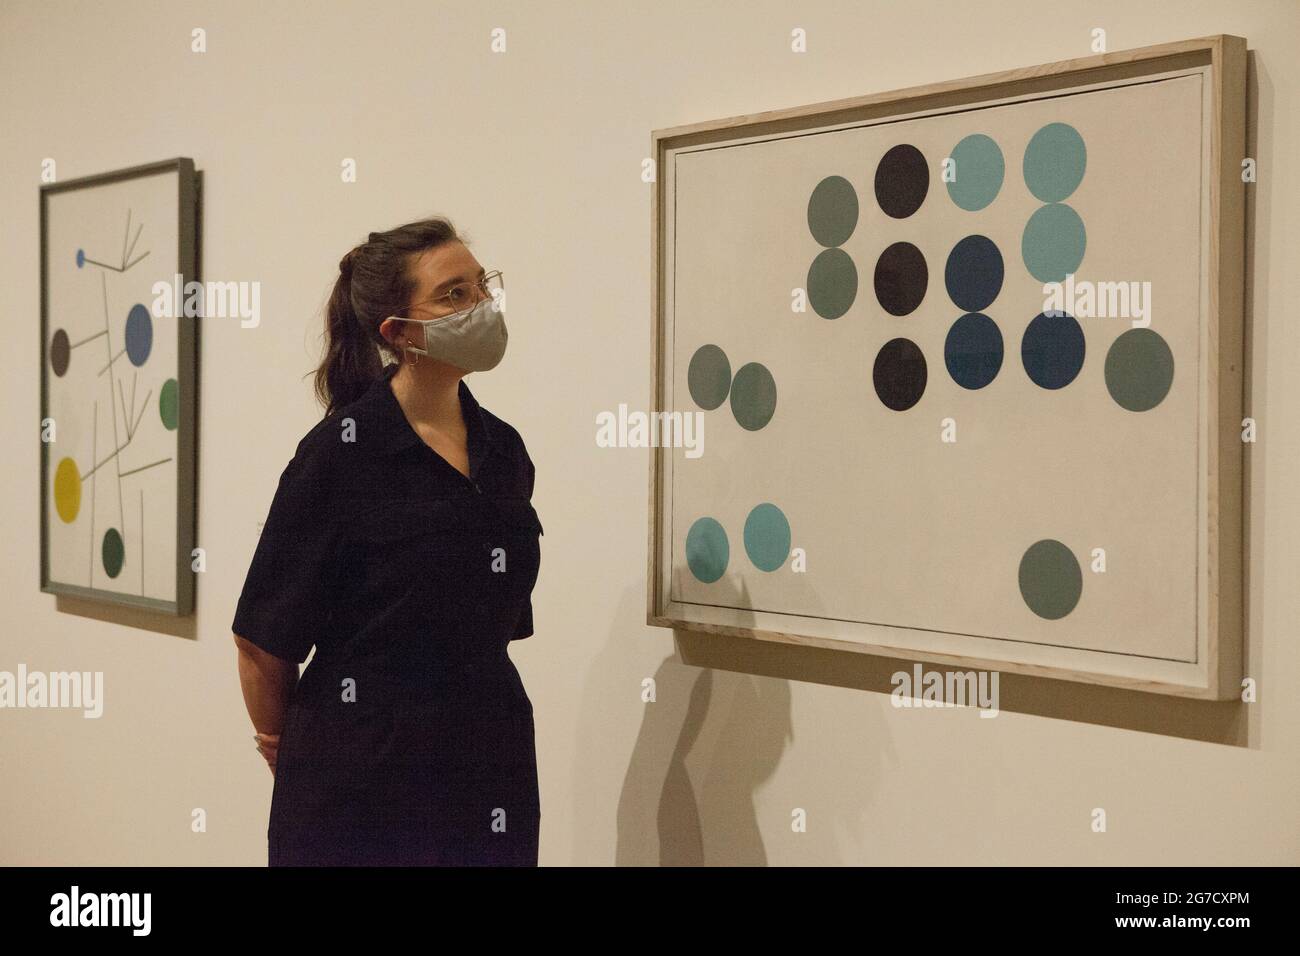 London, UK, 13 July 2021: Pioneering Swiss artist and designer Sophie Taeuber-Arp is celebrated with an exhibition at Tate Modern, opening on 15 July. Here a staff member looks at 'Aminated Circle Picture' from 1934. Sophie Taeuber-Arp (1889-1943) was a painter, craft makers, architect, interior designer, performer, jewellery maker and teacher who worked in France and Switzerland as was involved with Dadaism and abstract art in pre-war Europe. Anna Watson/Alamy Live News Stock Photo